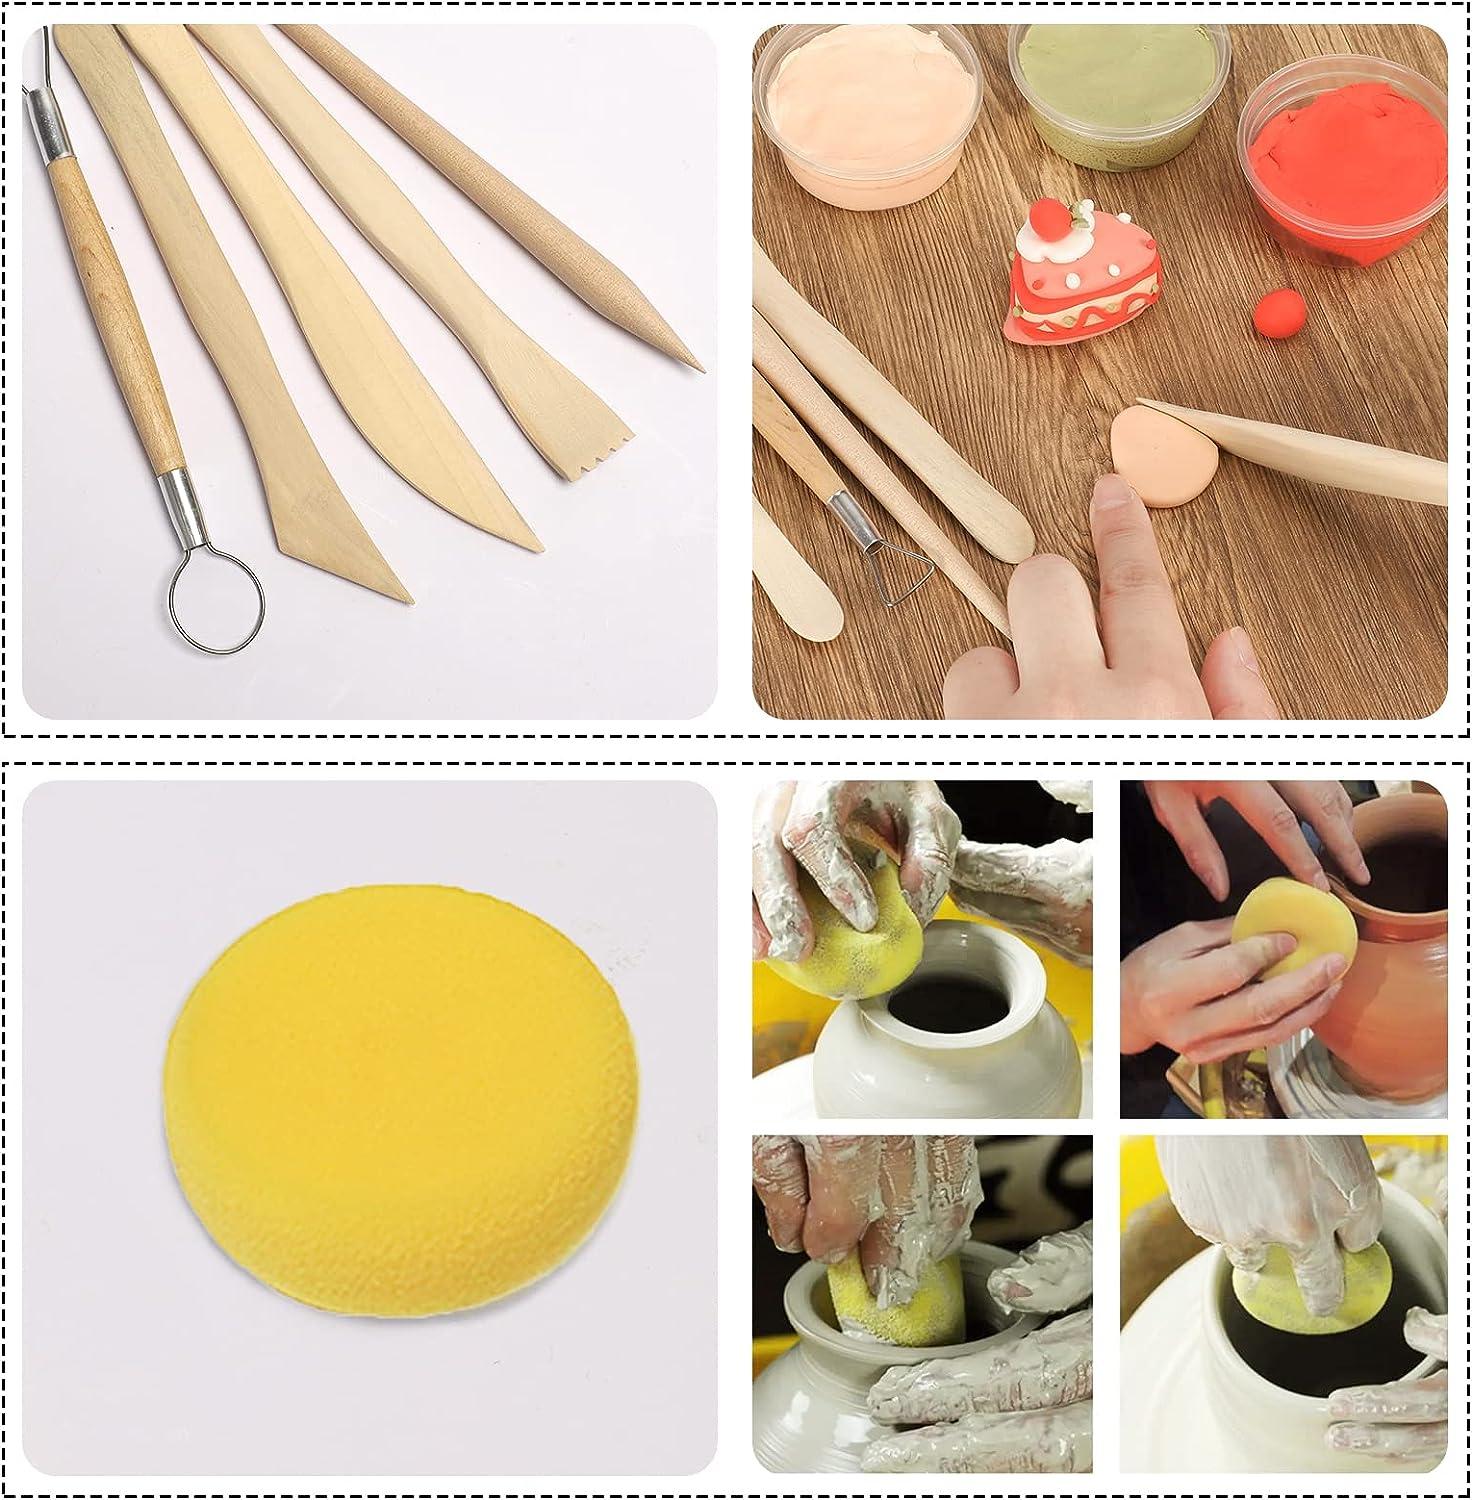 31pcs Polymer Clay Sculpting Tools Set, Air Dry Modeling Clay Roller  Dotting Tool Kit Fondant Metal Cutters Silicone Embossing Pen Balls Stylus  Rollin